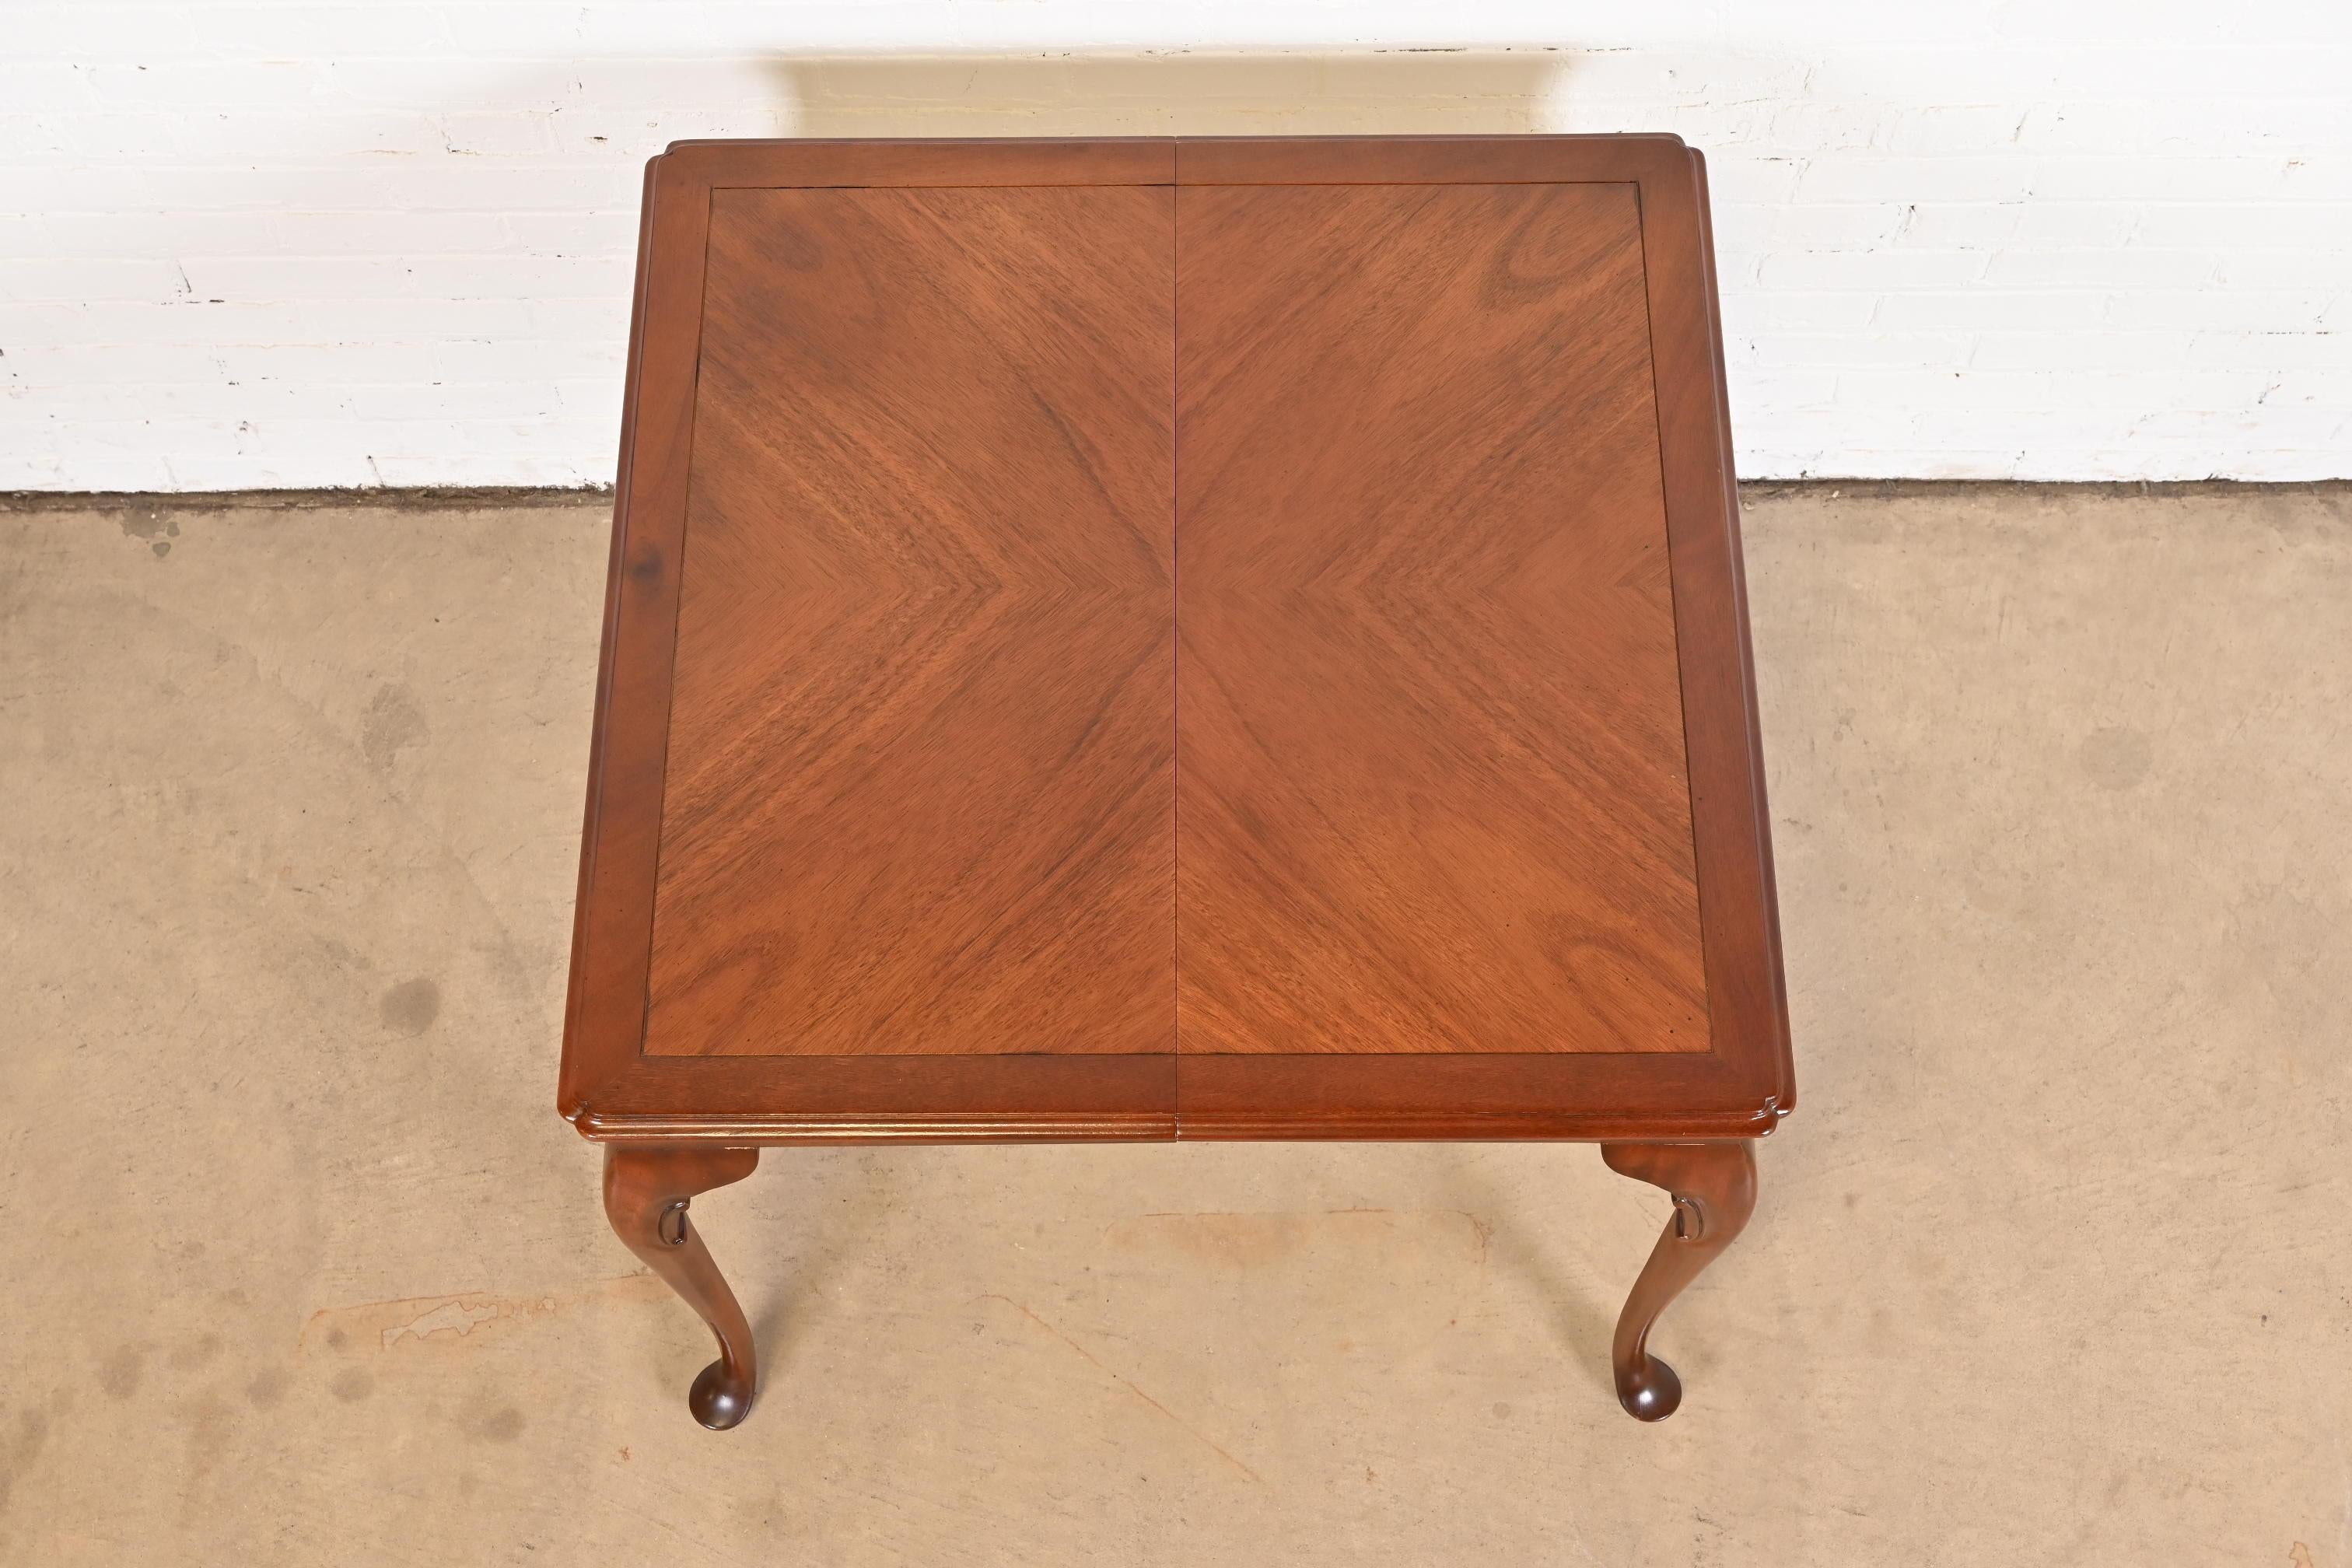 20th Century Kindel Furniture Queen Anne Mahogany Petite Extension Dining Table or Game Table For Sale